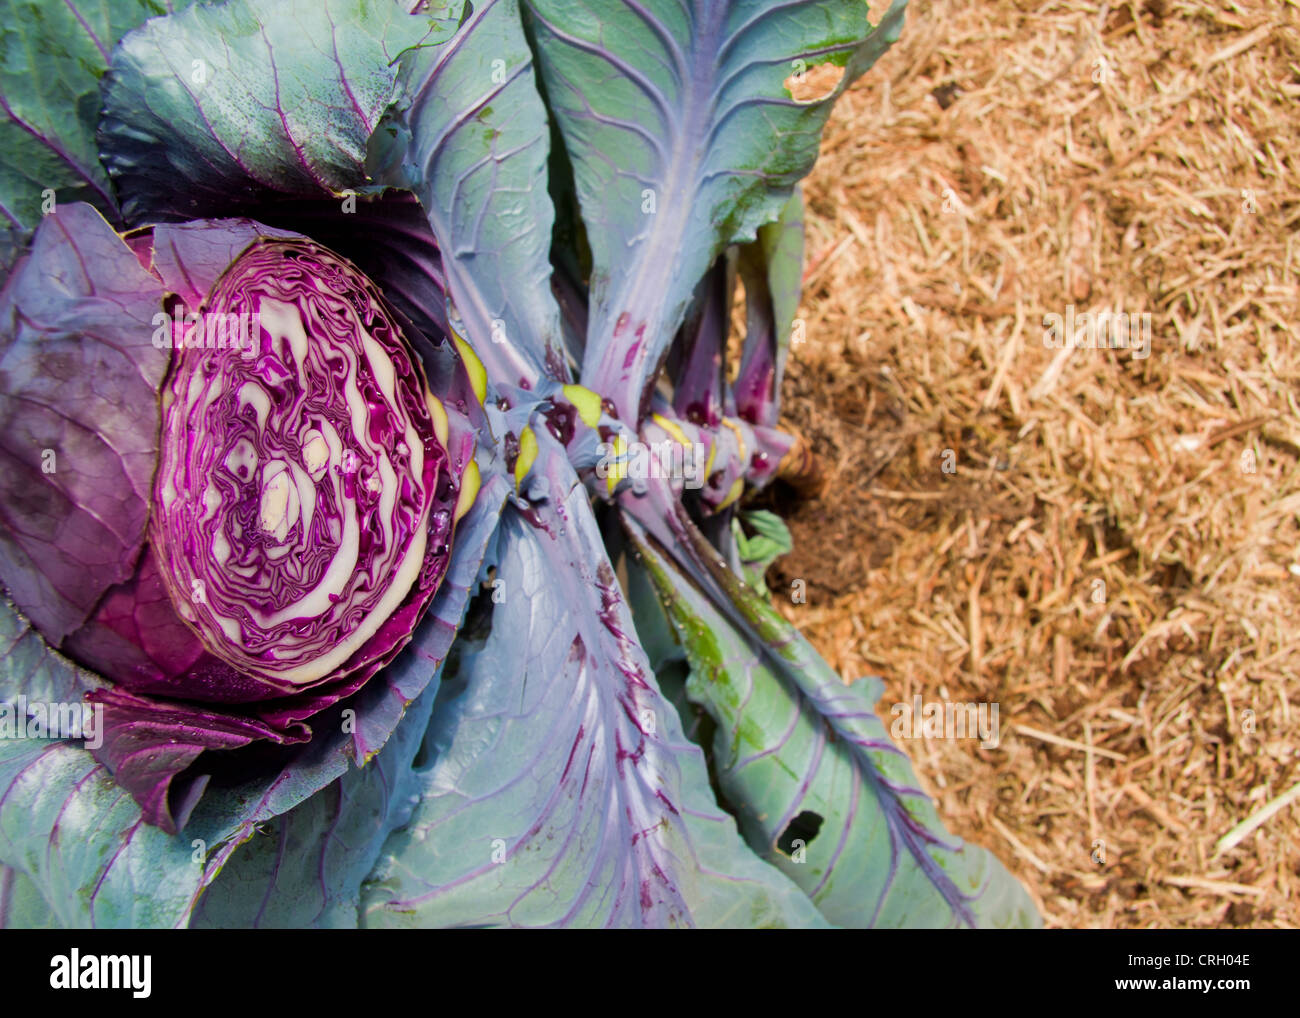 Purple Cabbage sliced in half with hay background Stock Photo